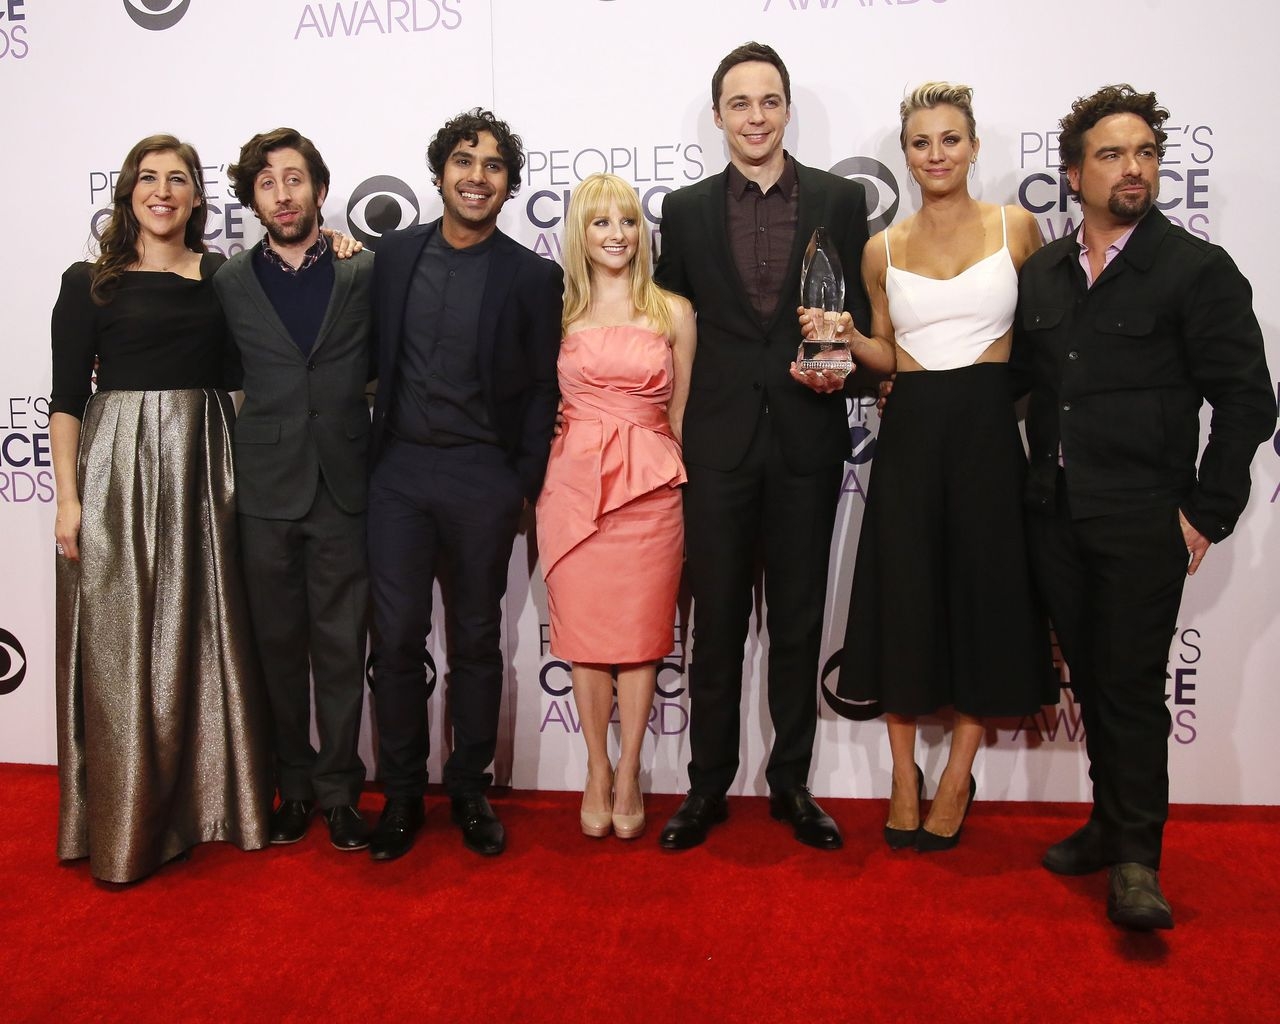 The Big Bang Theory Peoples Choice Awards for 1280 x 1024 resolution